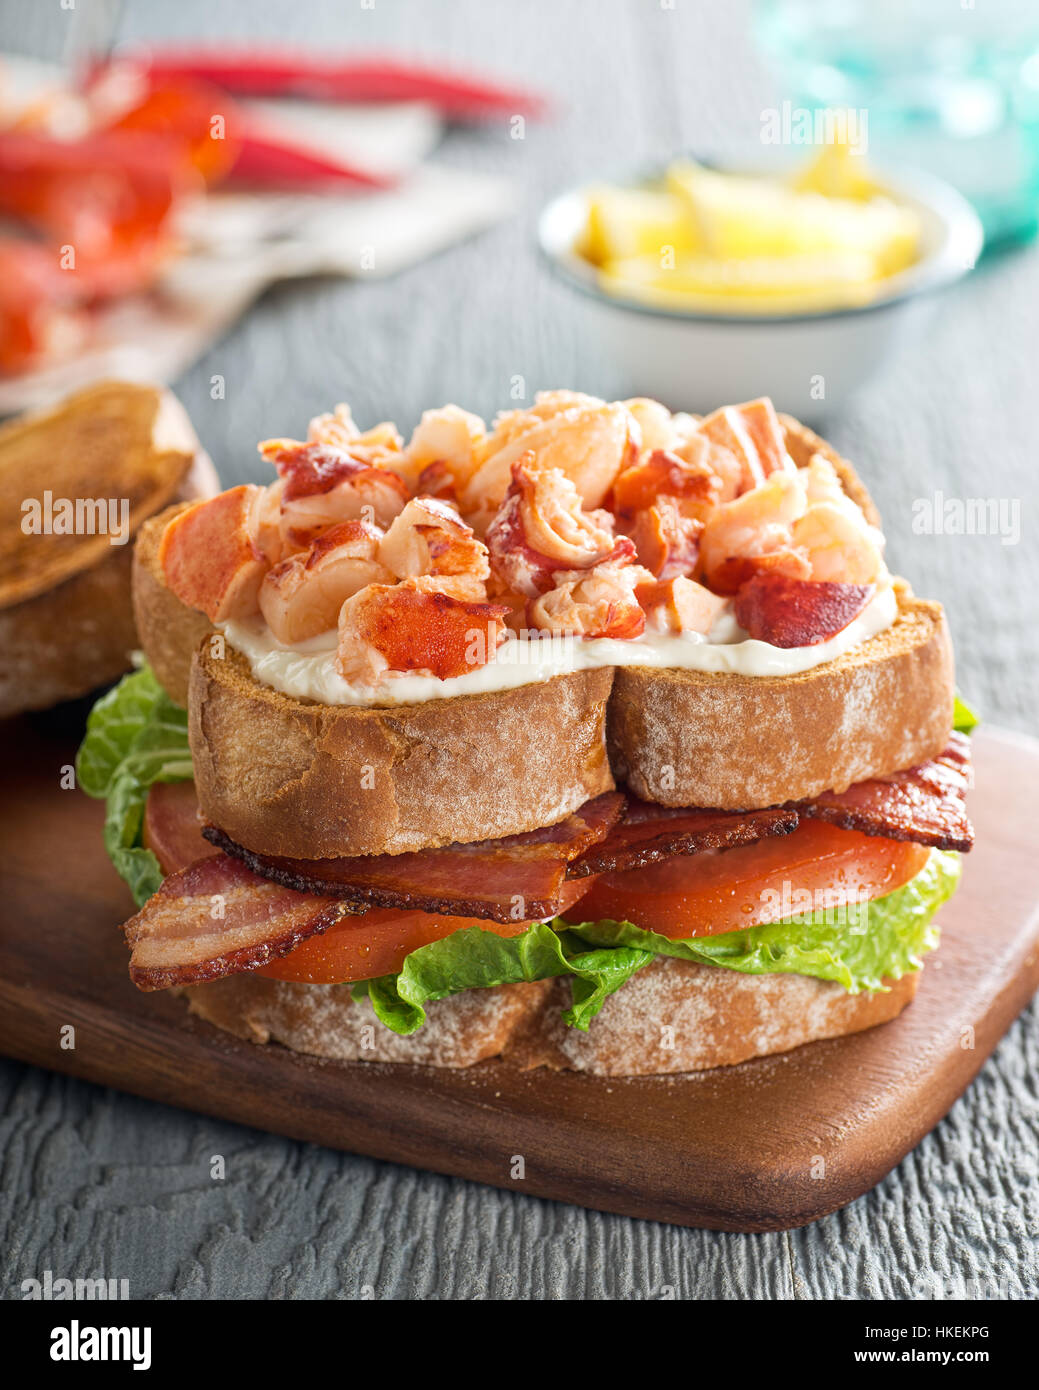 A delicious lobster club sandwich with bacon, lettuce, tomato, and mayonnaise on toasted bread. Stock Photo